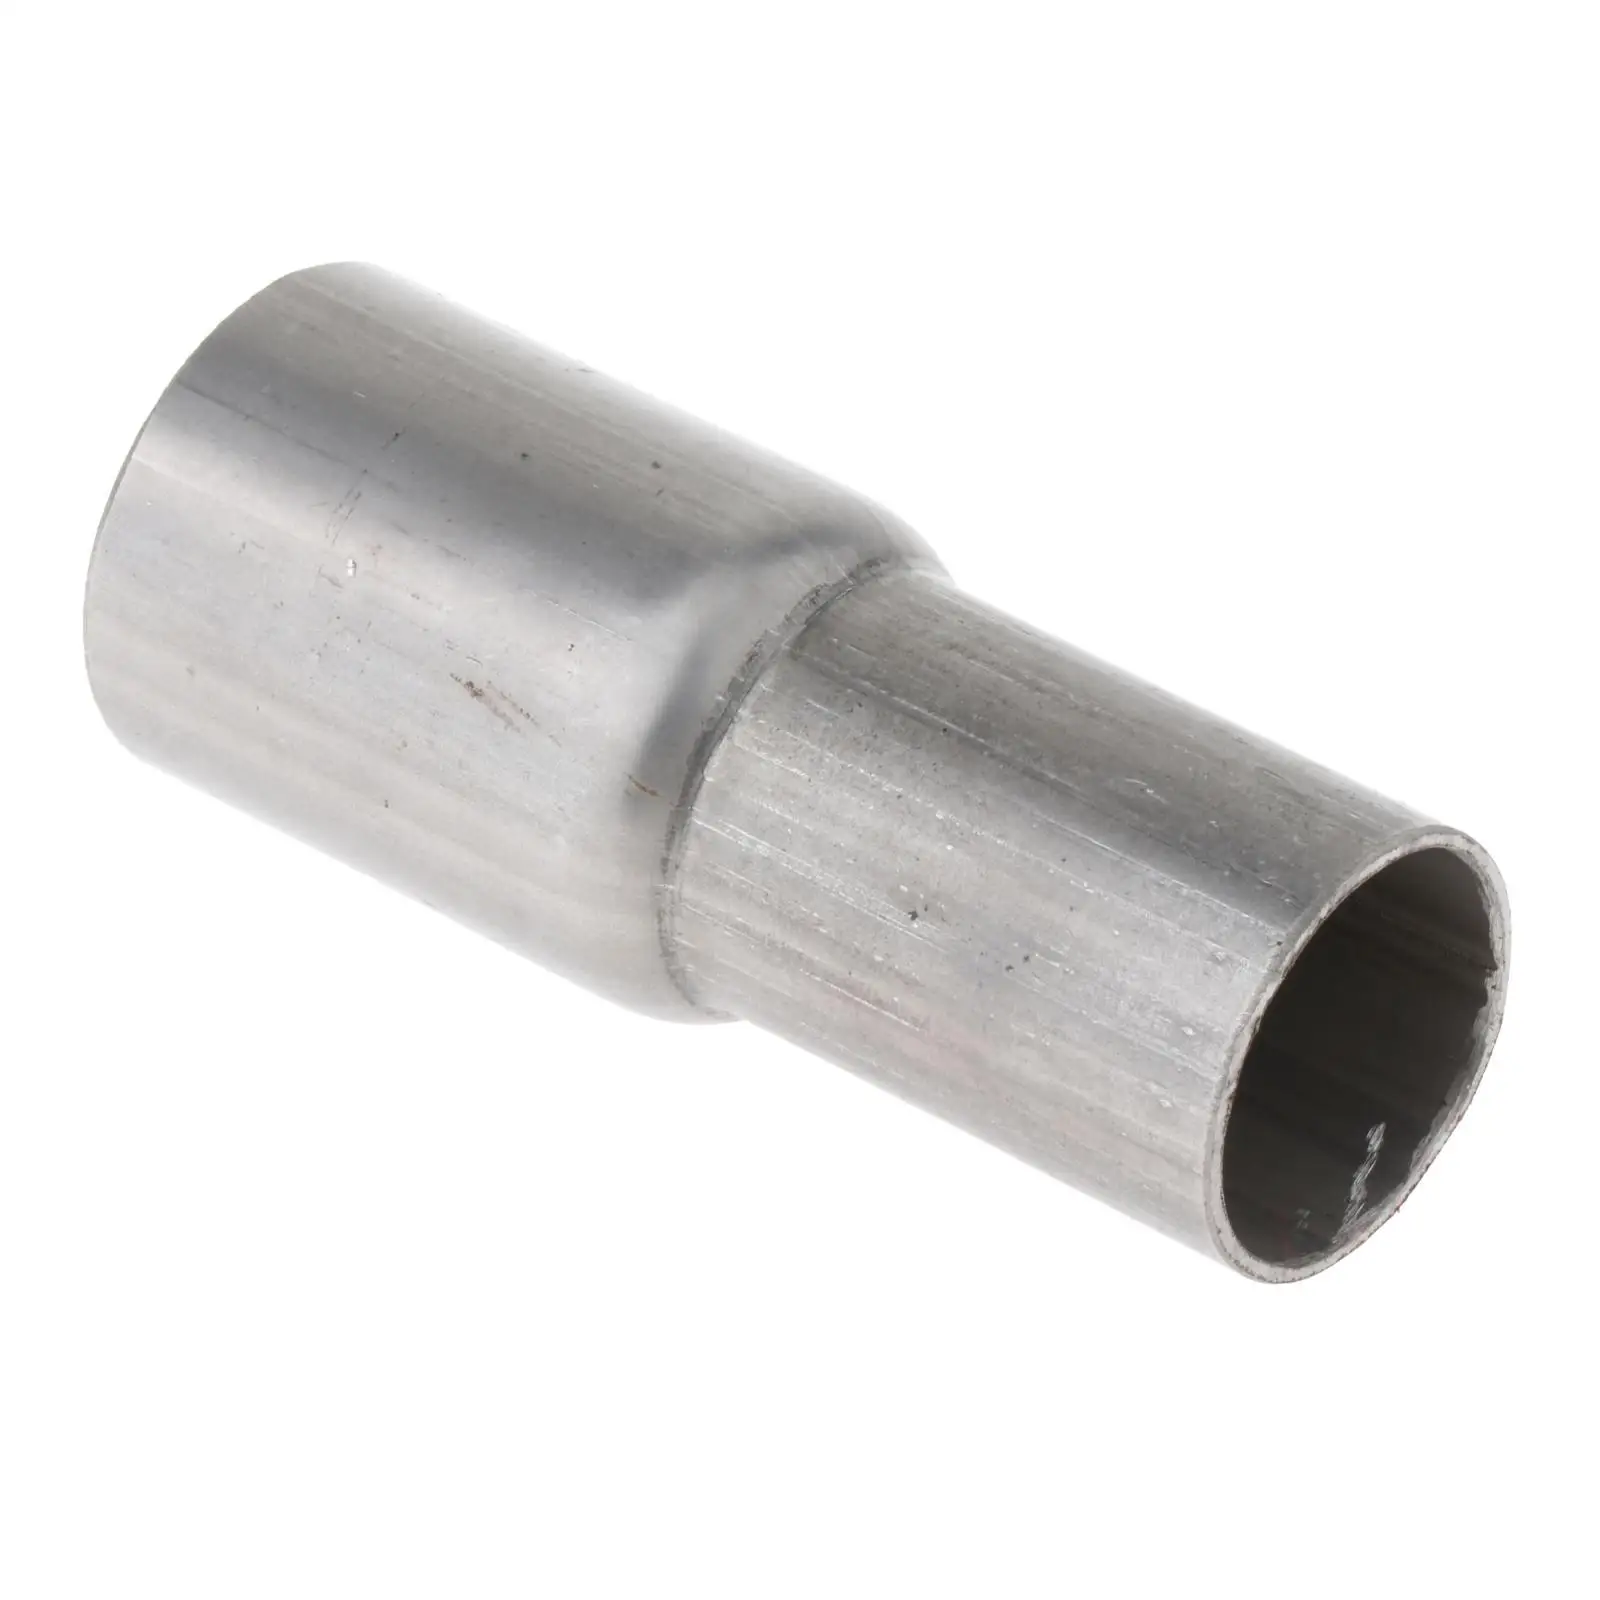 Exhaust Connector Pipe Heavy Duty Straight Lead Motors Truck Exhaust Adapter